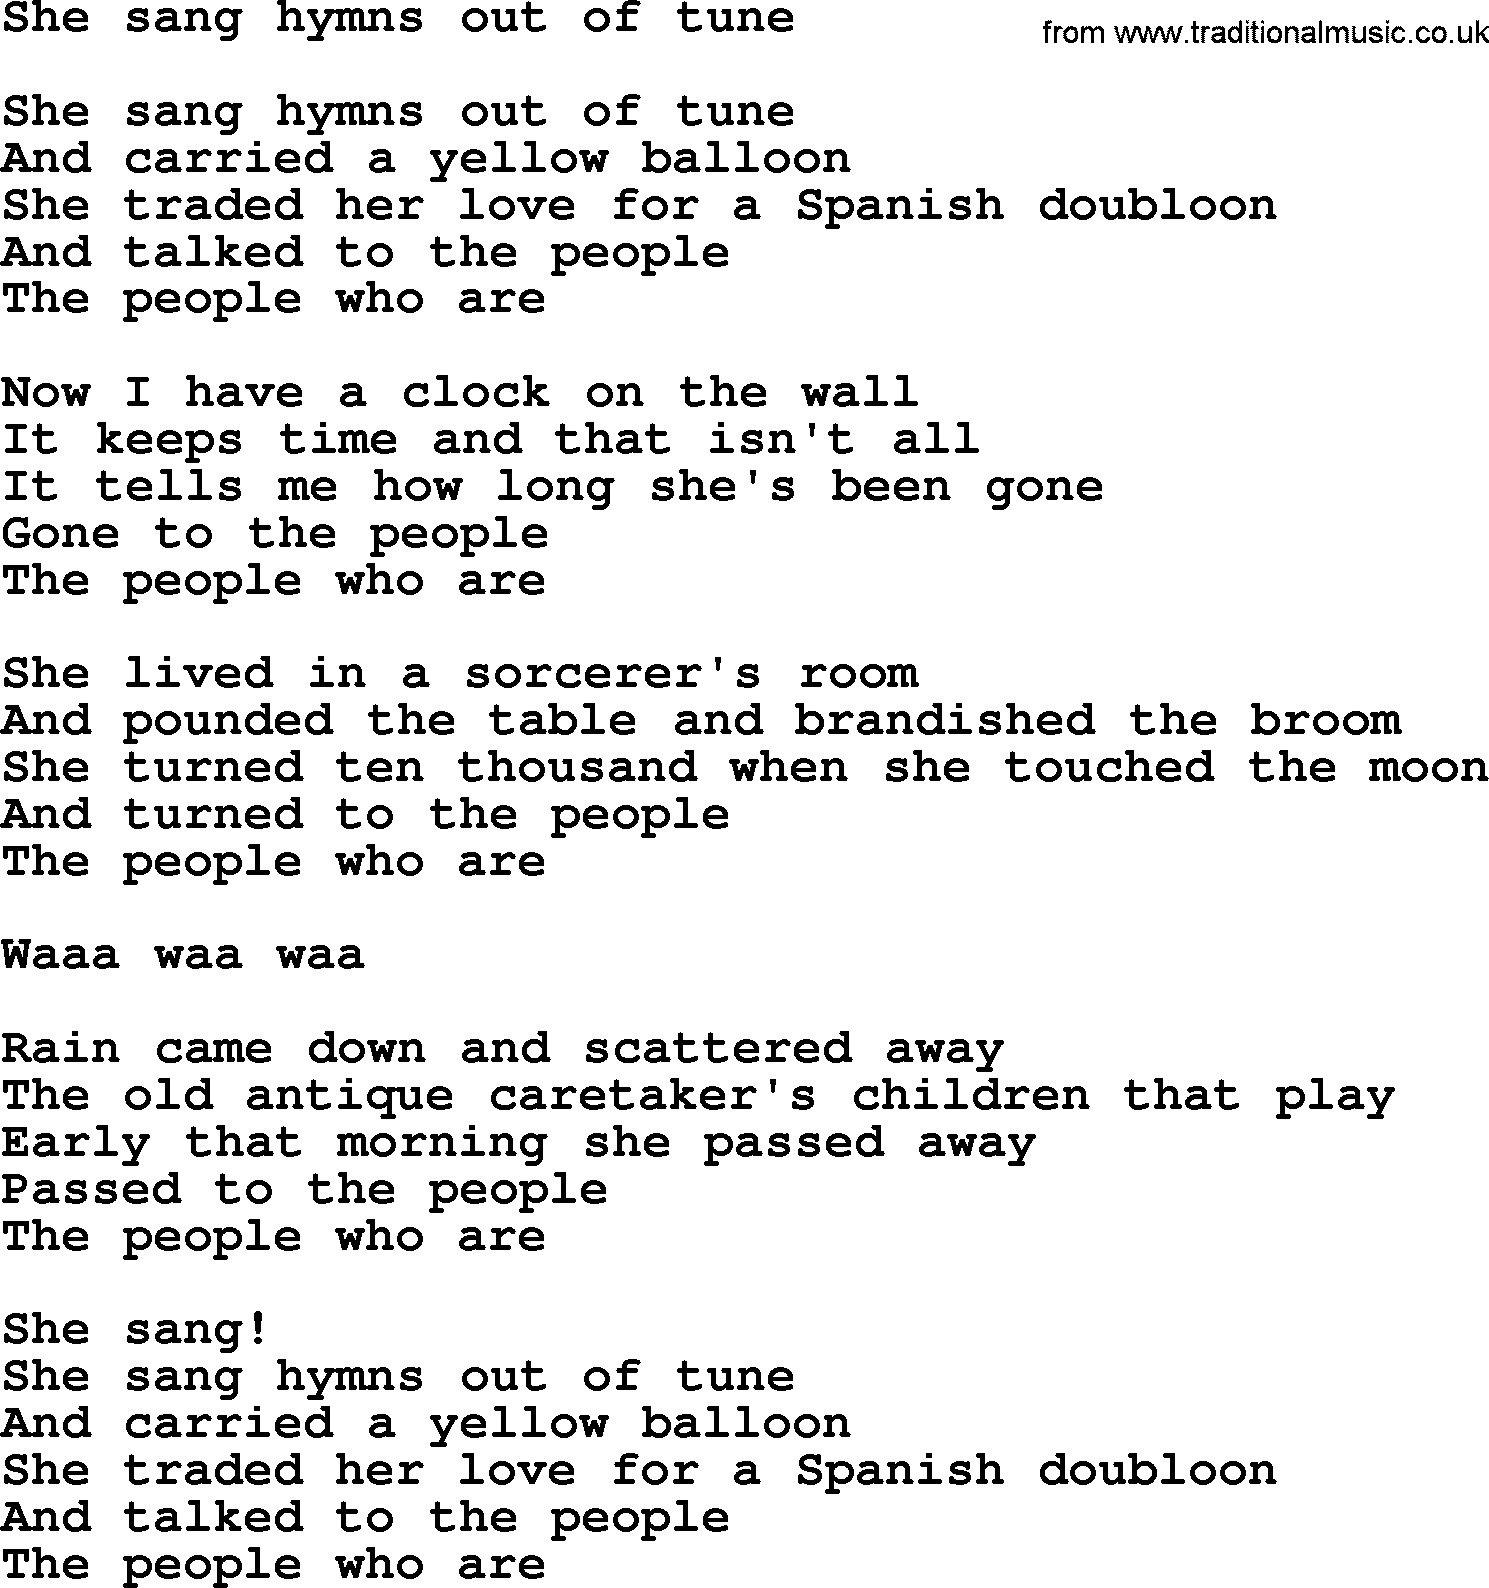 The Byrds song She Sang Hymns Out Of Tune, lyrics